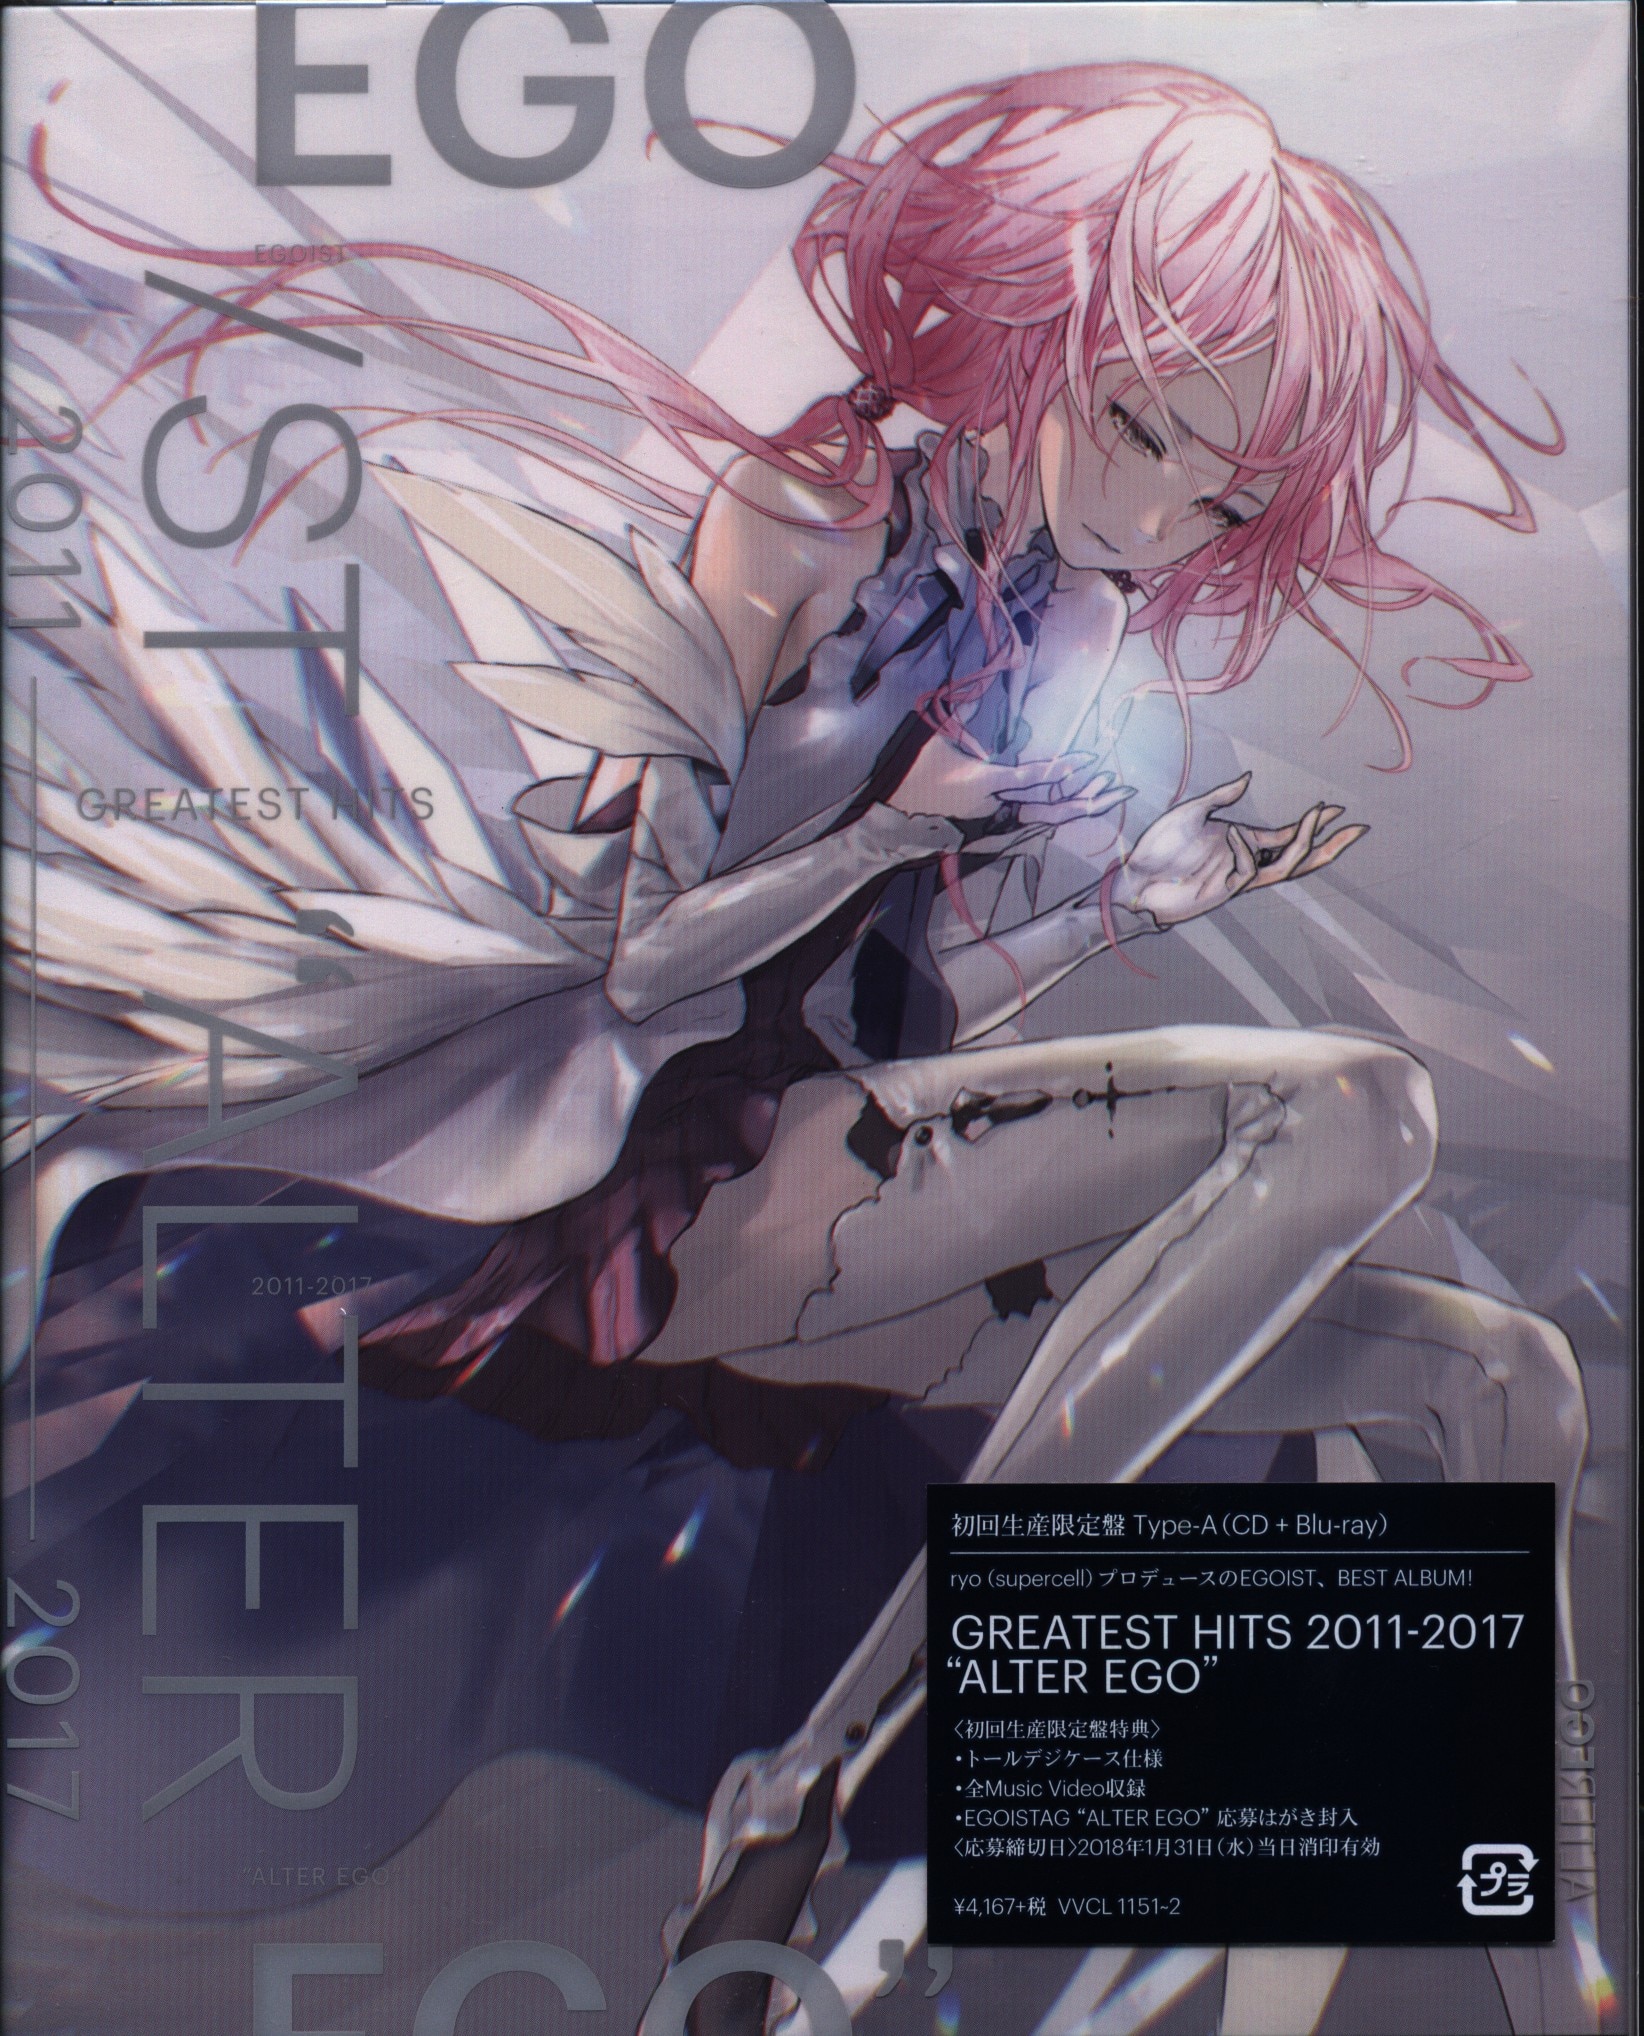 Album Egoist Greatest Hits 11 17 Alter Ego With First Edition Production Limit Release Mandarake Online Shop